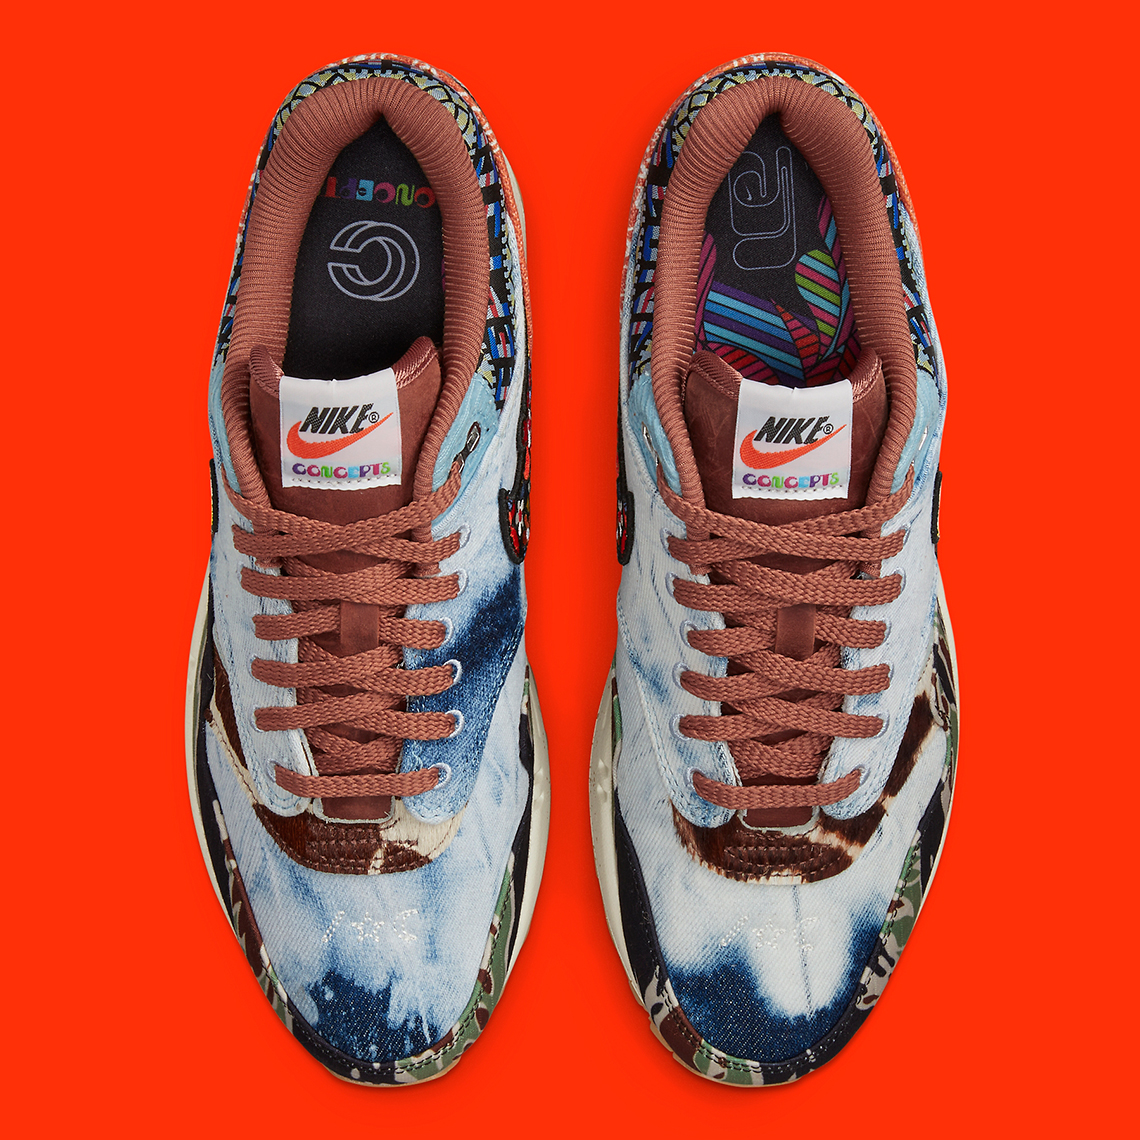 concepts nike air max 1 camo dn1803 900 release date 2